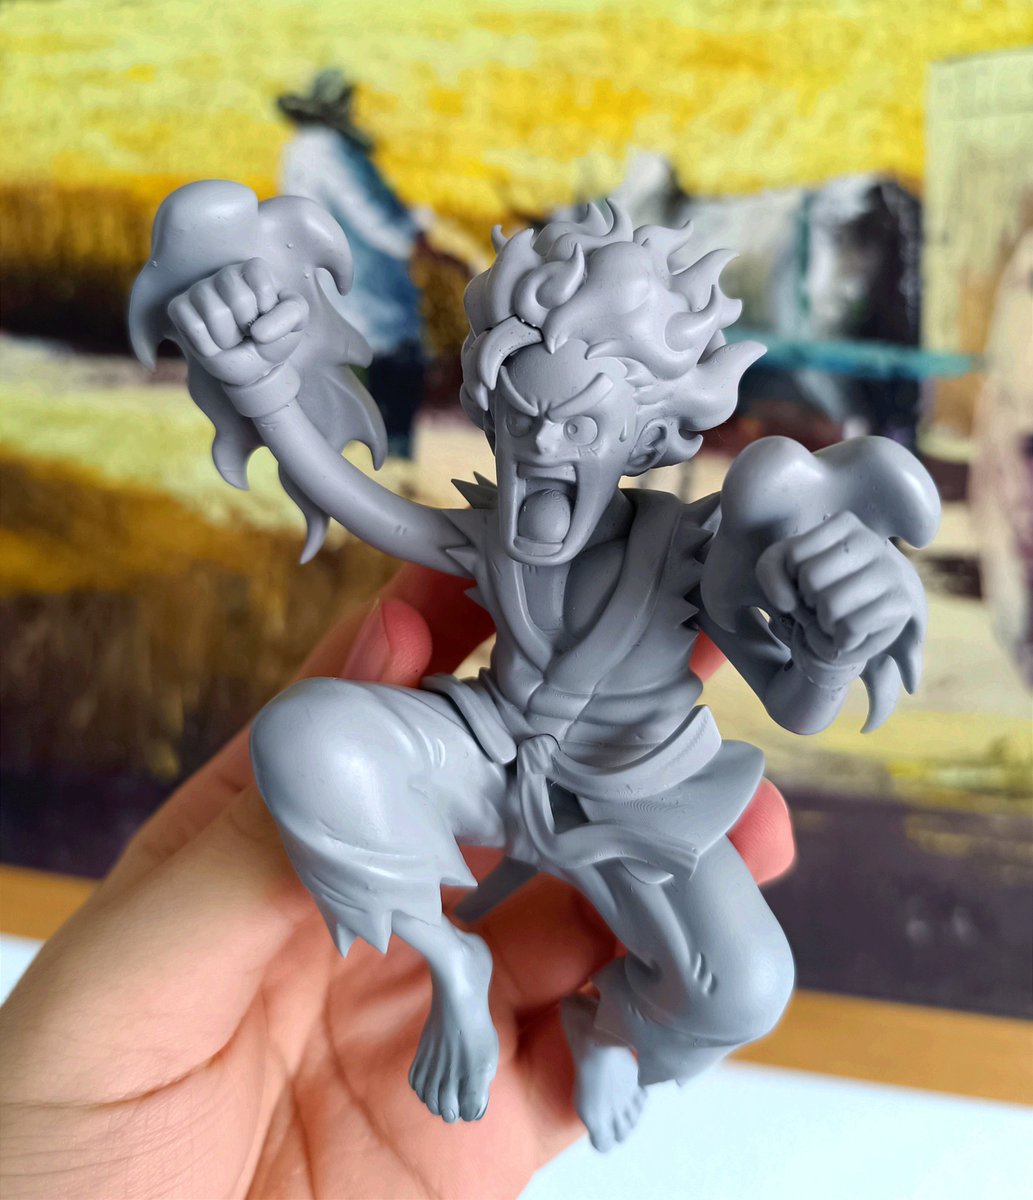 Should I just release it as it is? I failed with the base. Also no good product renders. :C
No energy for a new base just stick him onto a metal rod...
#3dprint #garagekit #onepiece #animefigure